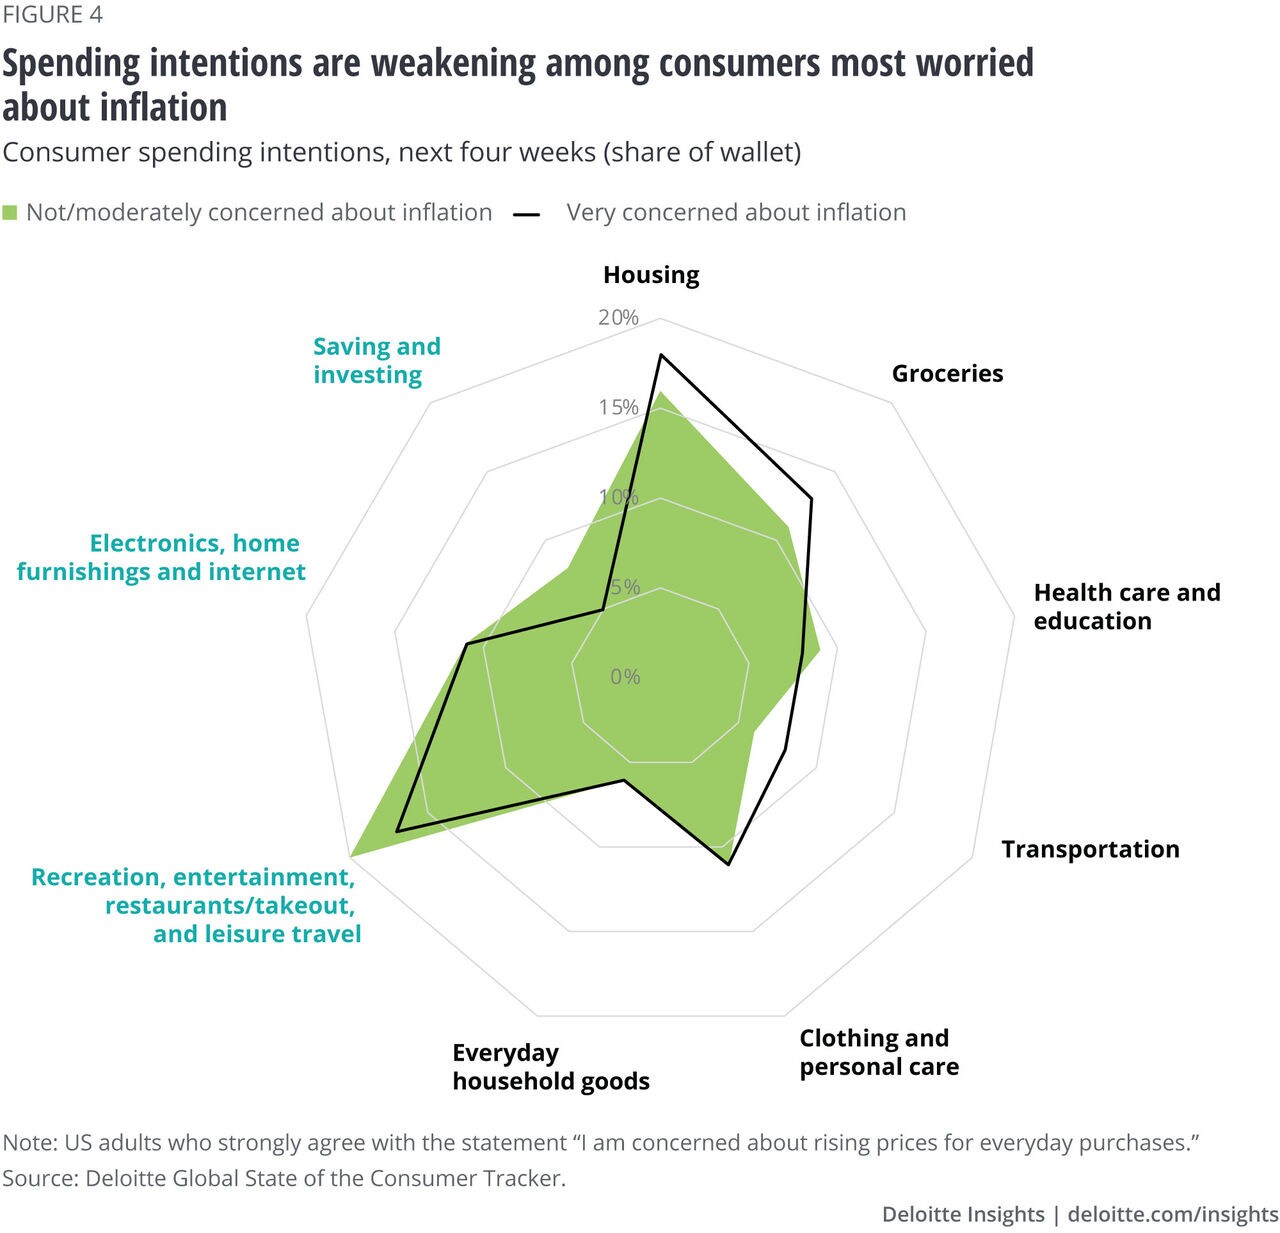 Figure 4. Spending intentions are weakening among consumers most worried about inflation